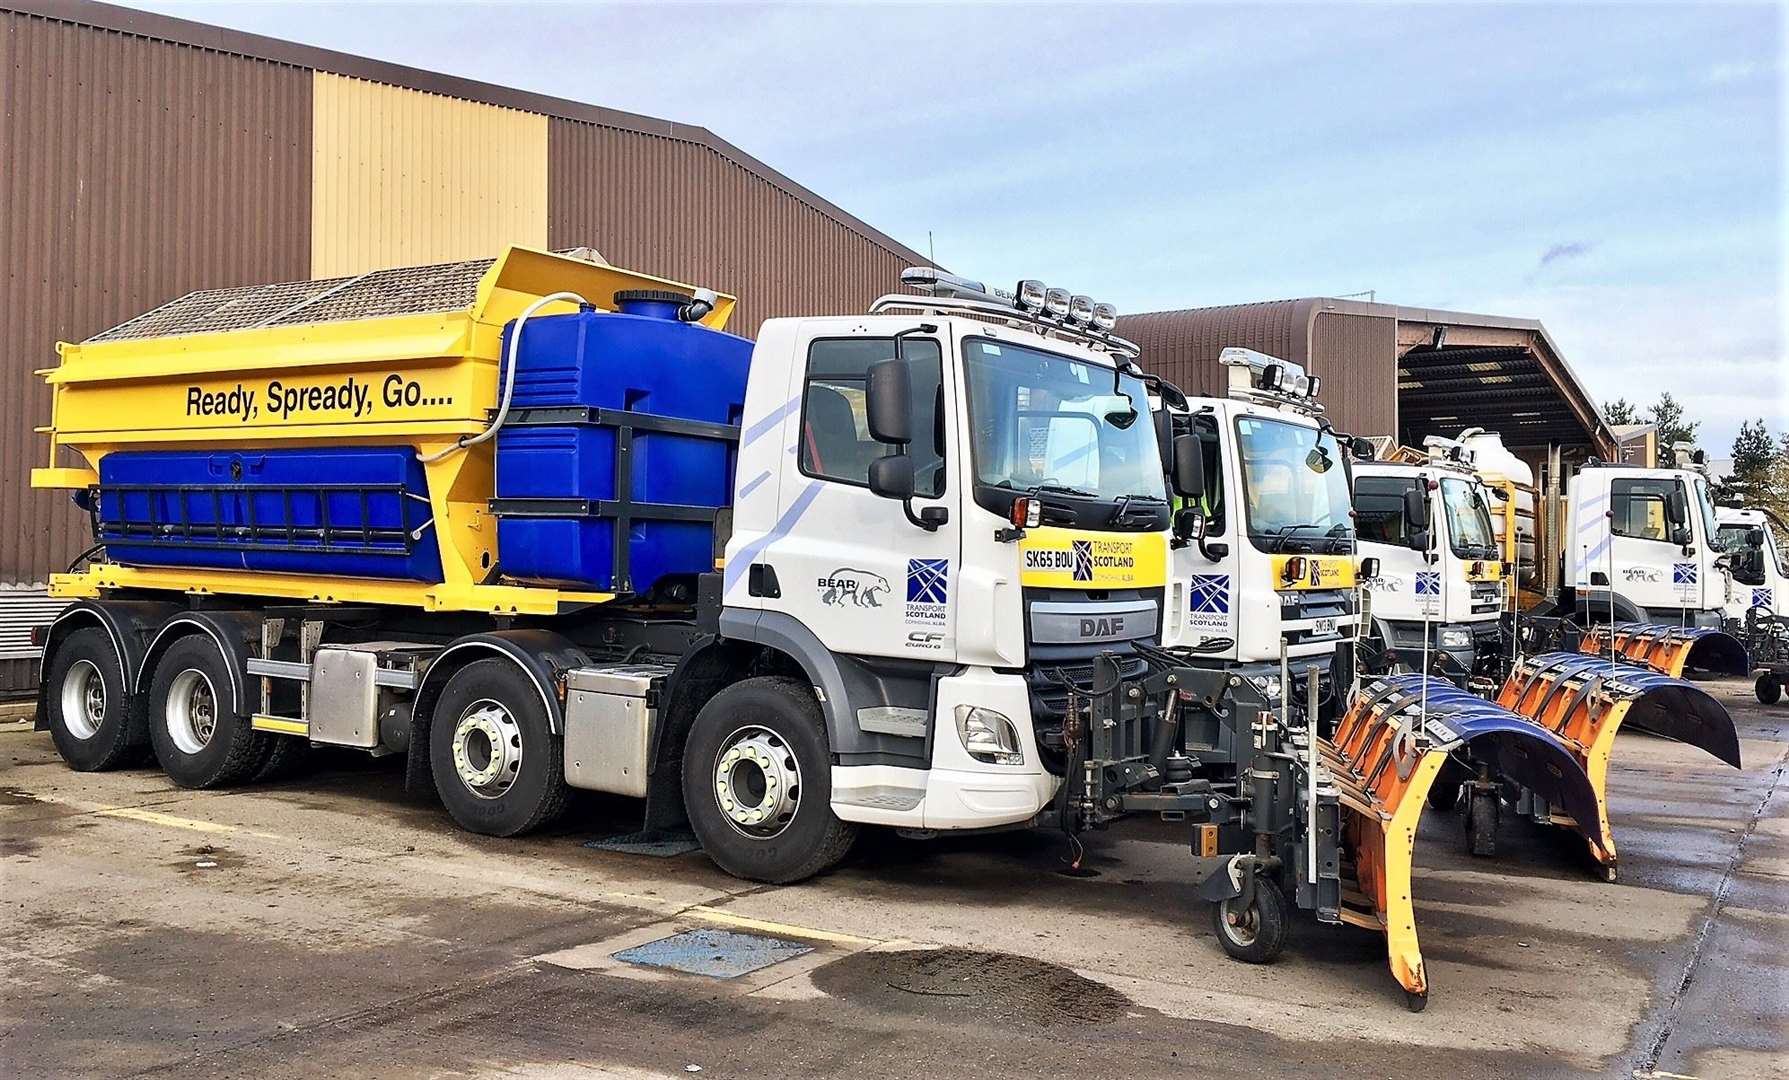 Ready, Spready Go! and other gritters at their depot.